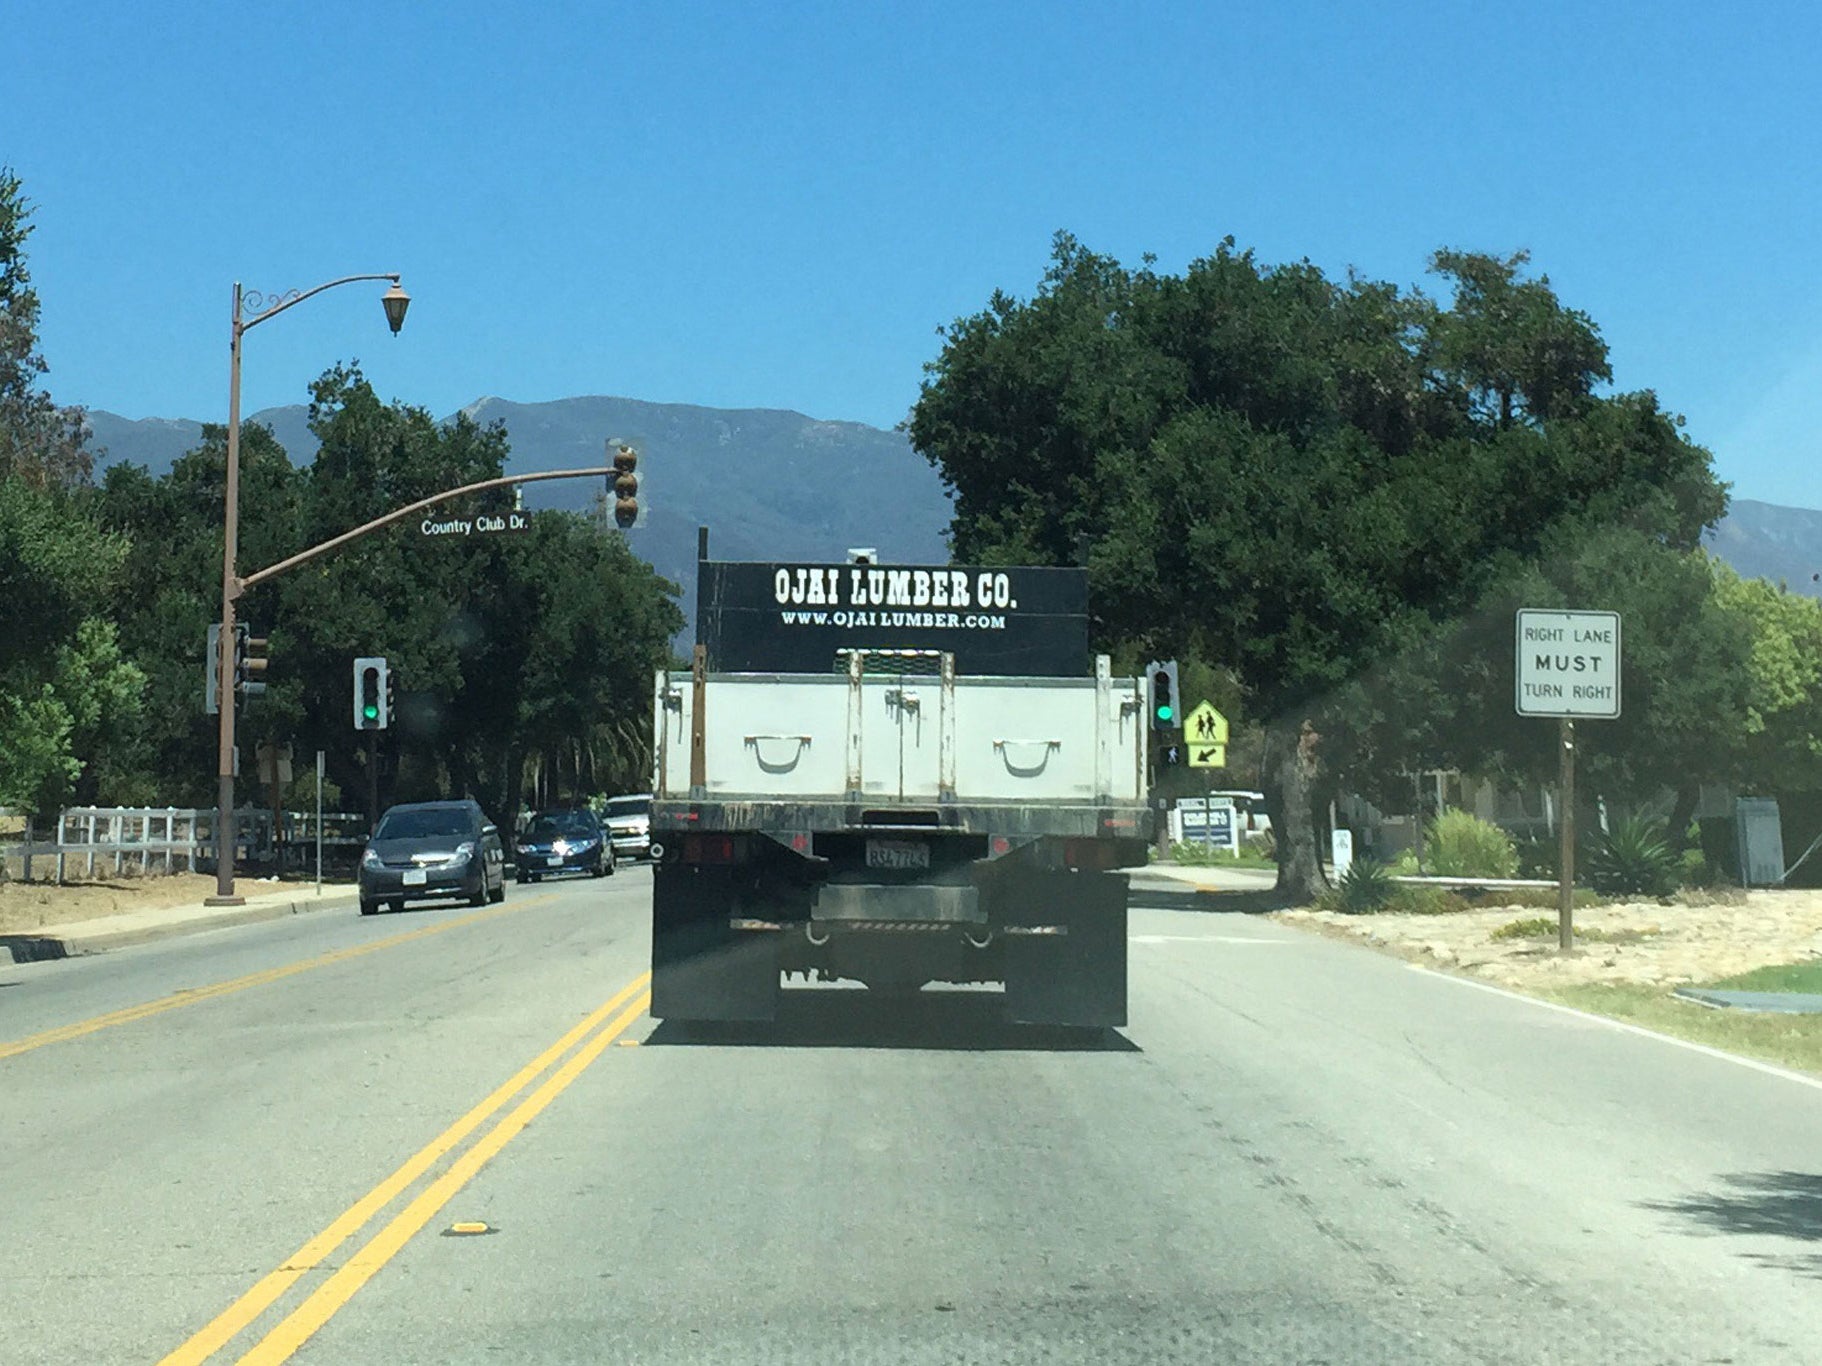 My original inspiration for Lumber Co. was this truck driving into Ojai, California.